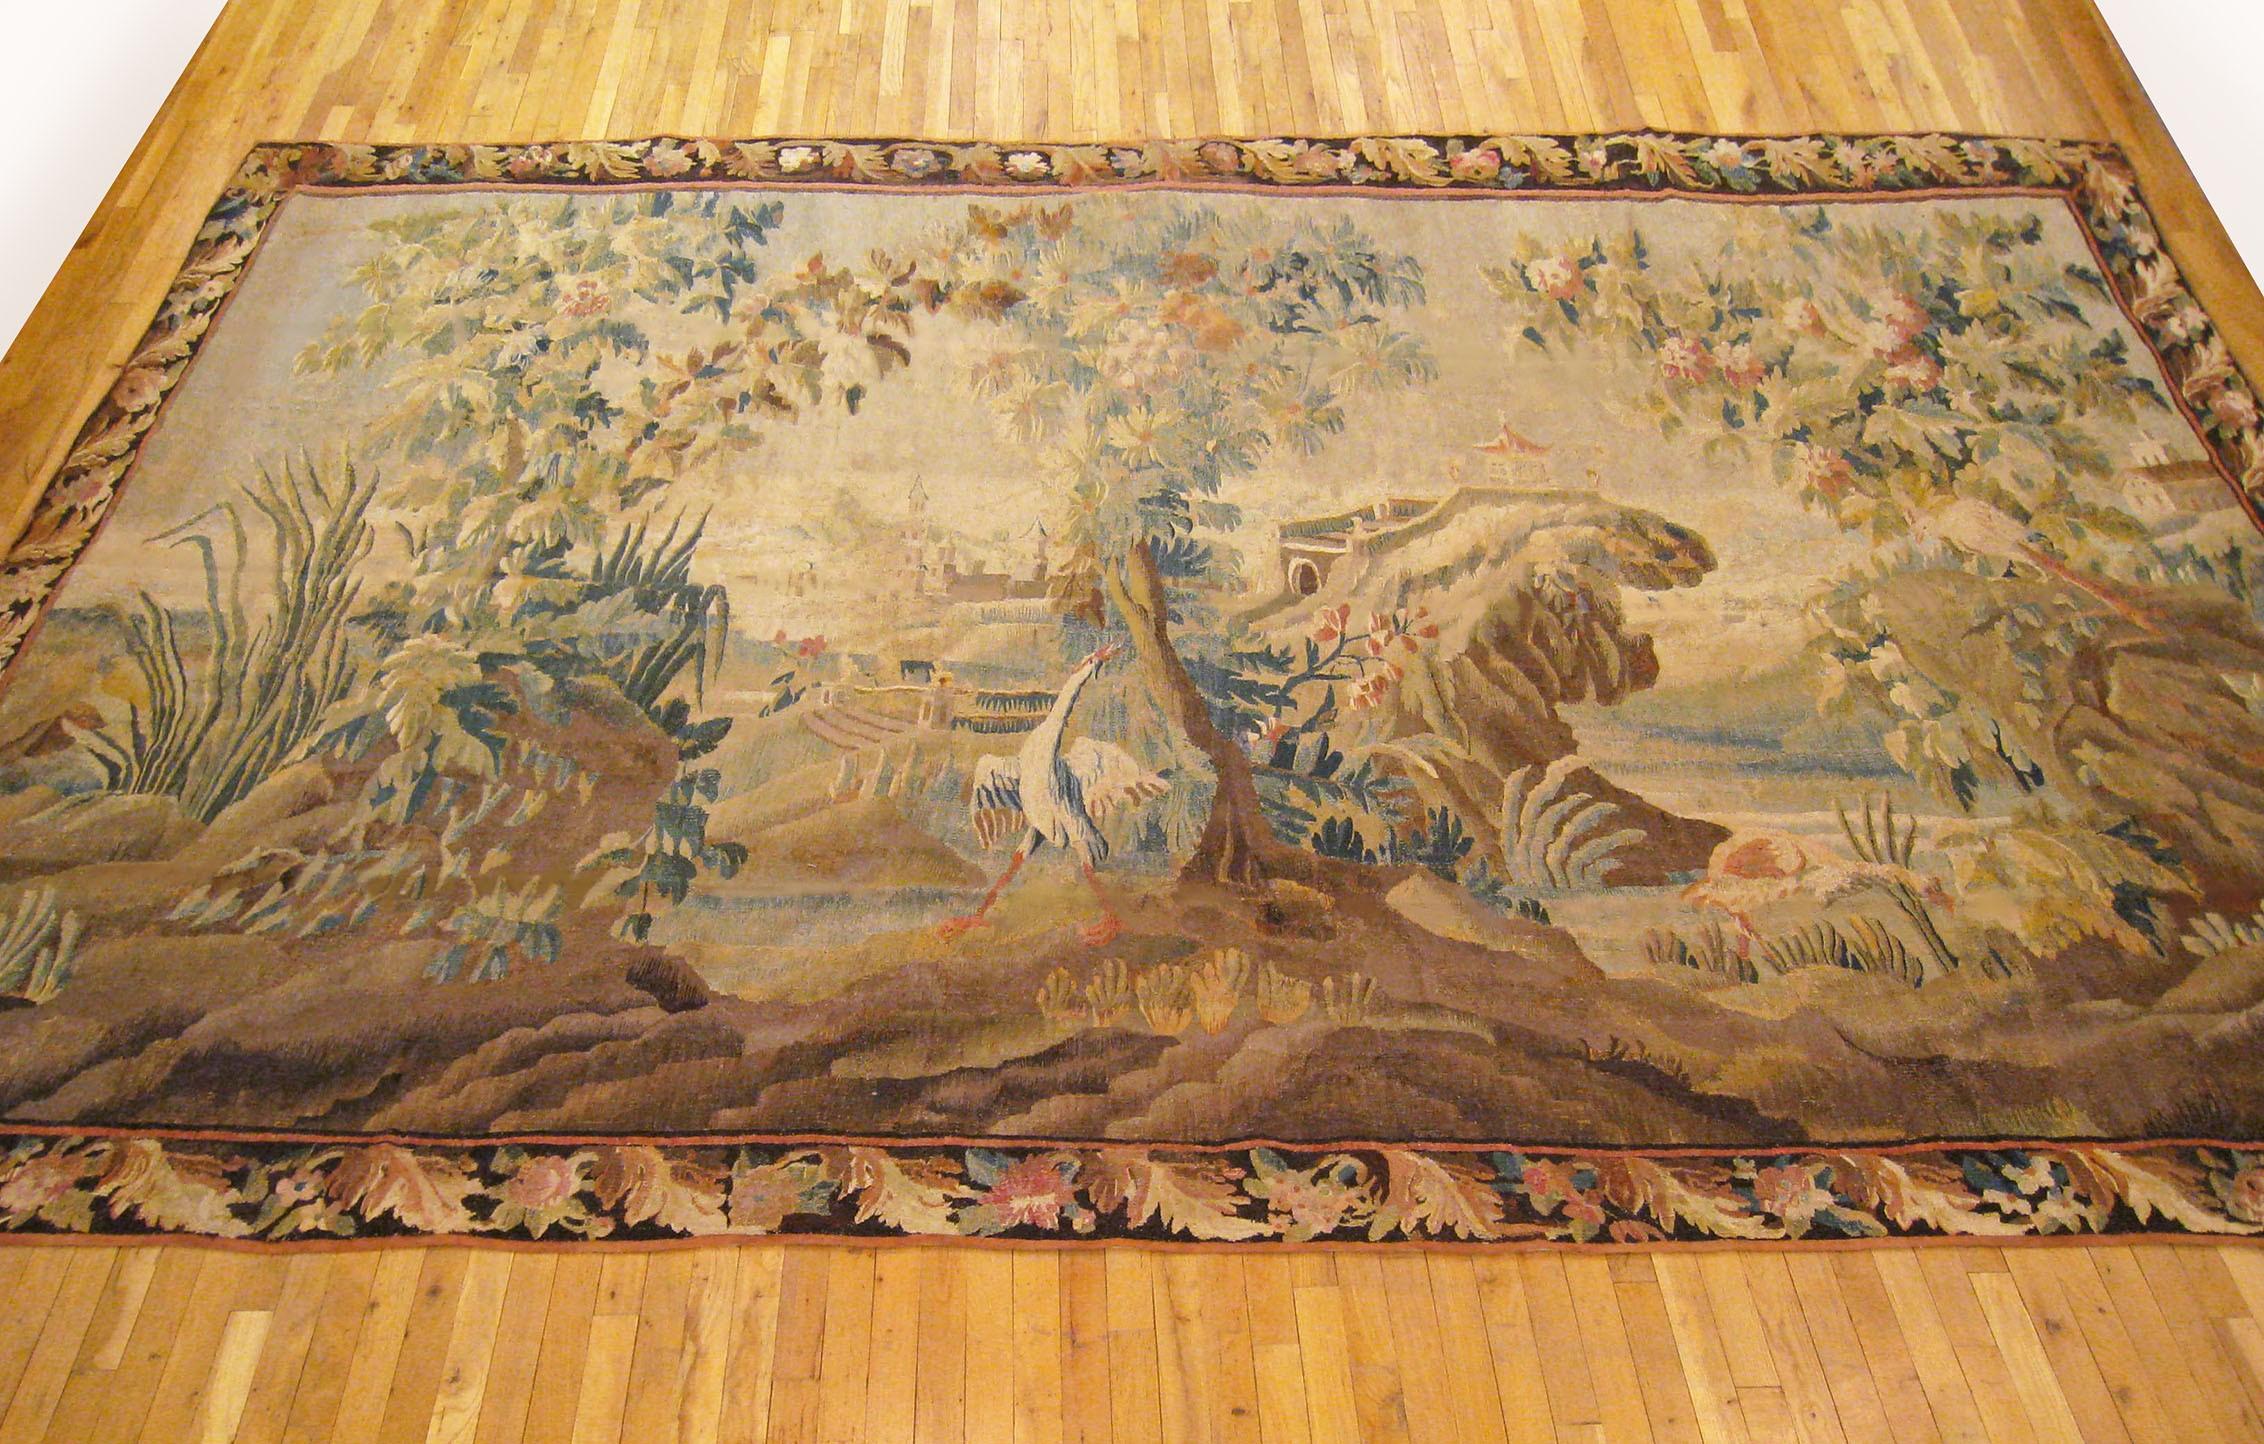 A Flemish chinoiserie landscape tapestry from the 17th century, picturing an idyllic scene with a stately white heron amidst the trees of the verdant foreground, an elegant pagoda overlooking the lake in the middle distance, and a castle amongst the